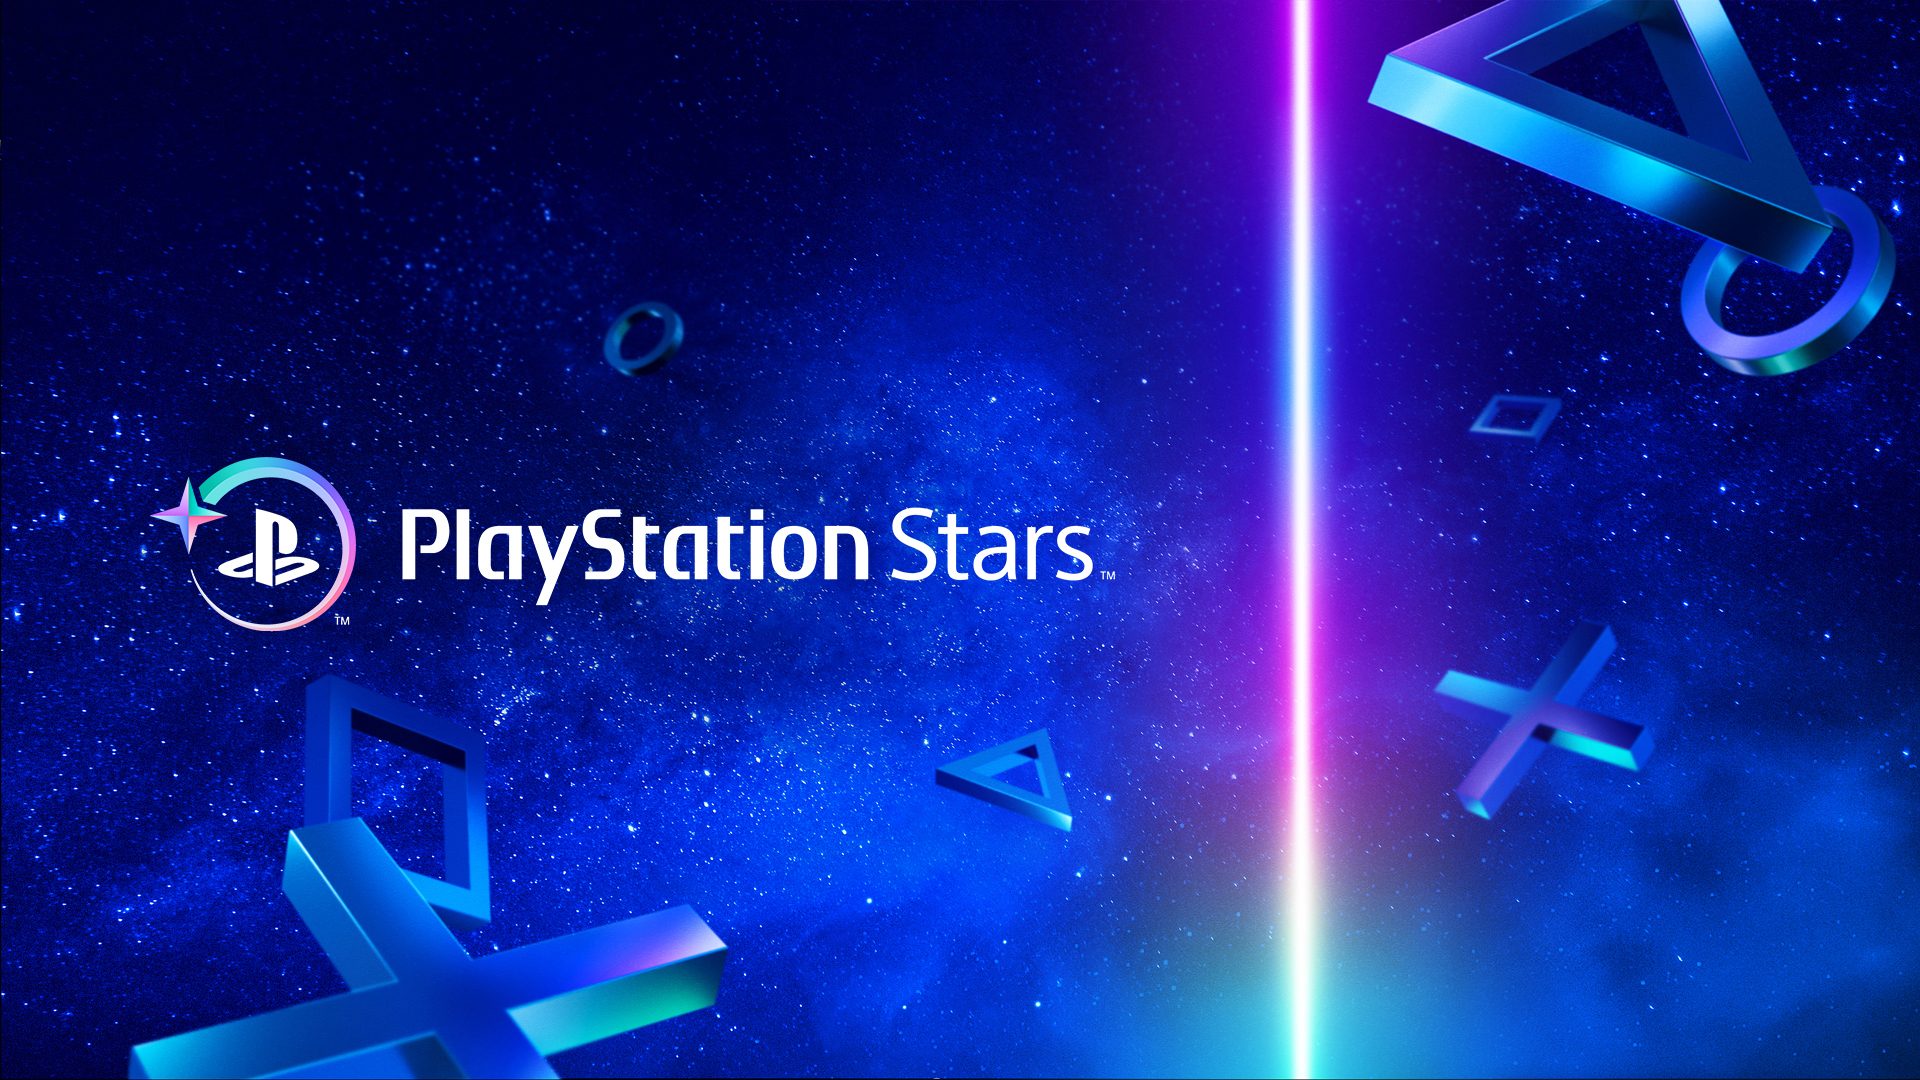 PlayStation Stars launches in Asia today, with additional markets coming soon – PlayStation.Blog